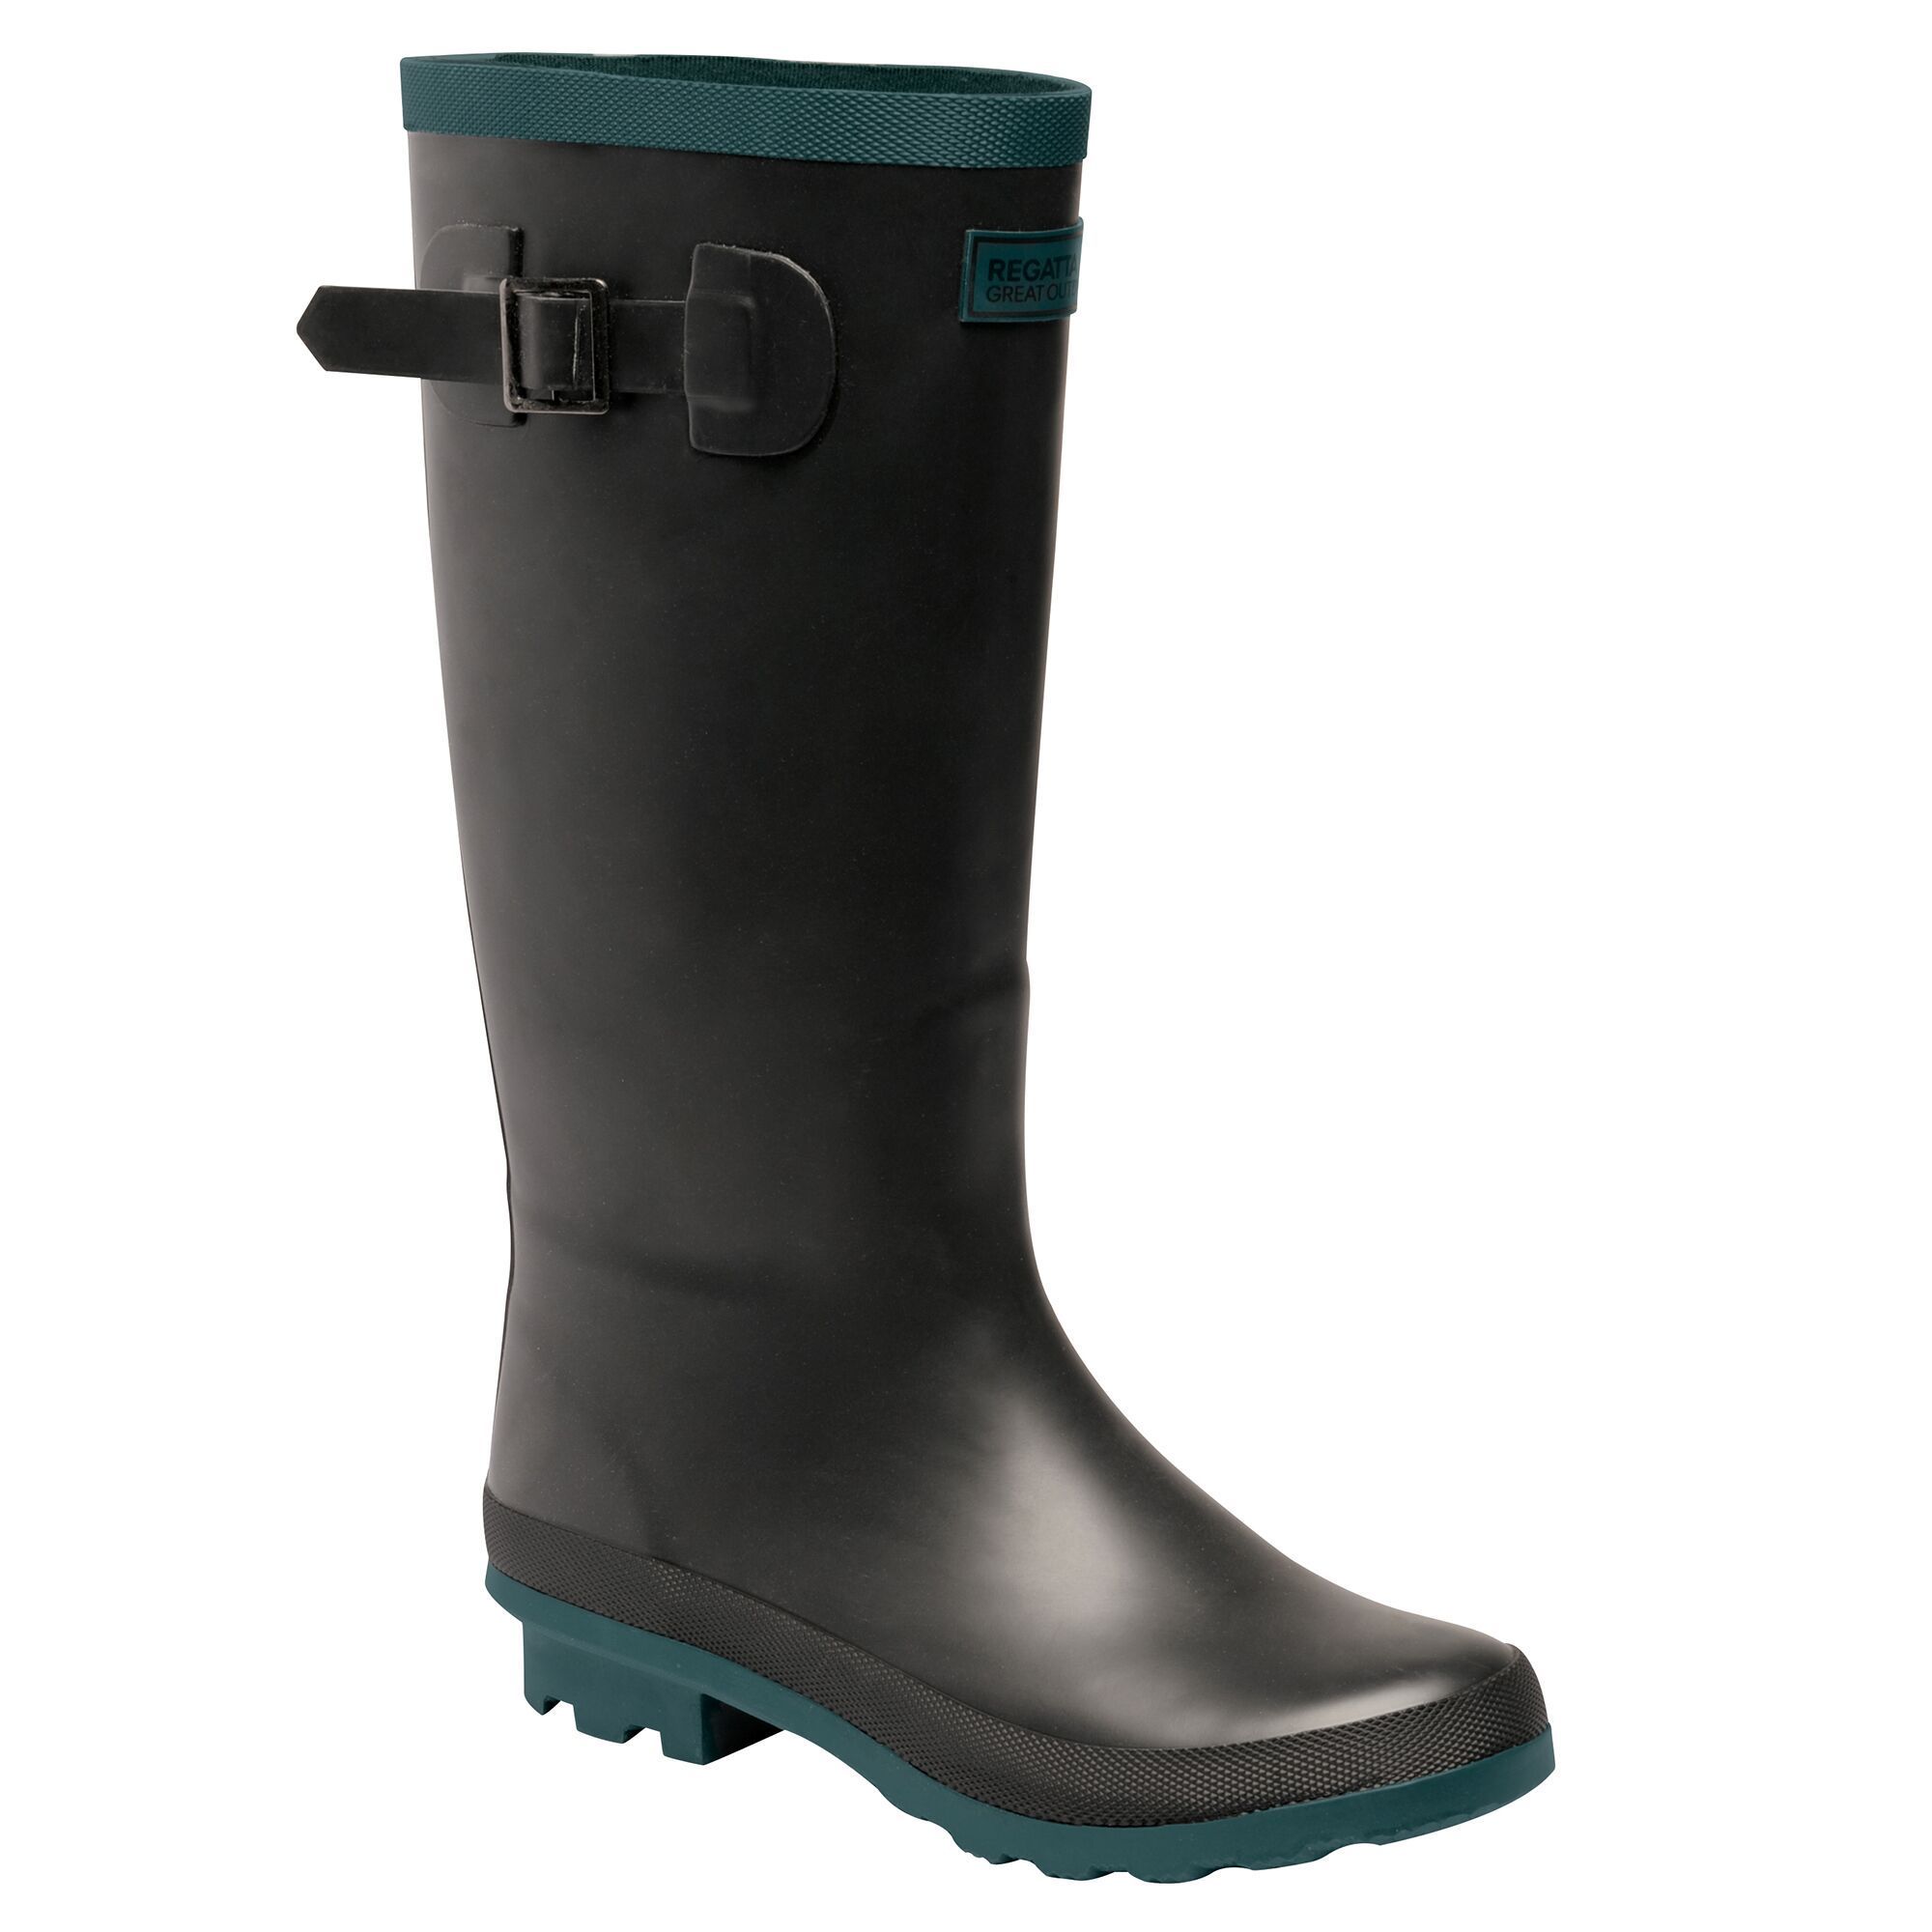 100% Rubber. Vulcanised natural rubber construction and comes with durable weather protection. These boots feature a new and improved fit, owing to the EVA comfort footbed. The rubberised outsole is hardwearing and has been built to last. These can also be worn under extreme cold conditions to keep the feet warm.